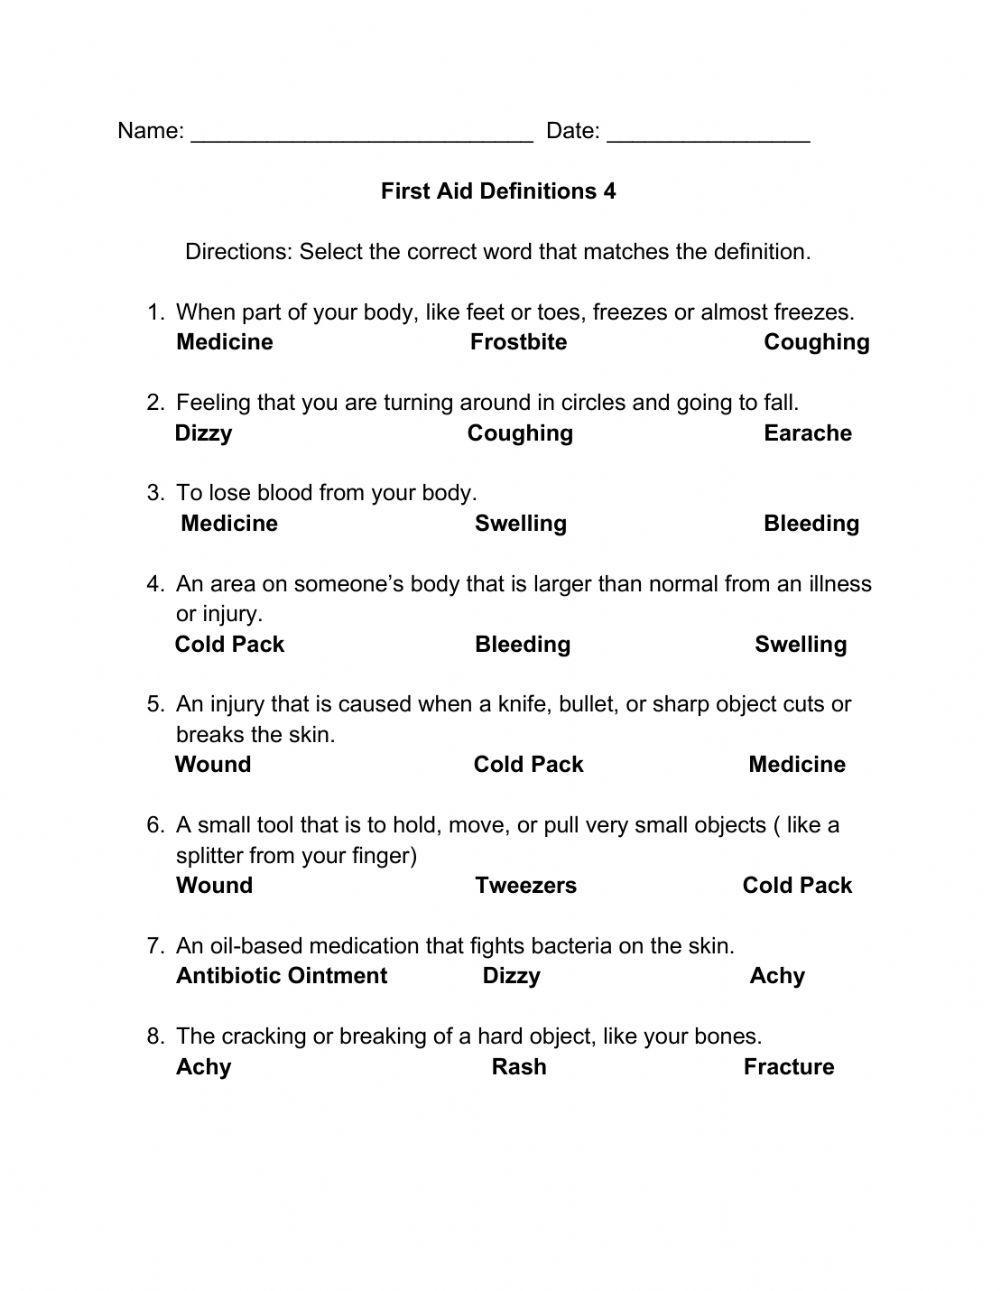 First Aid Definitions 4